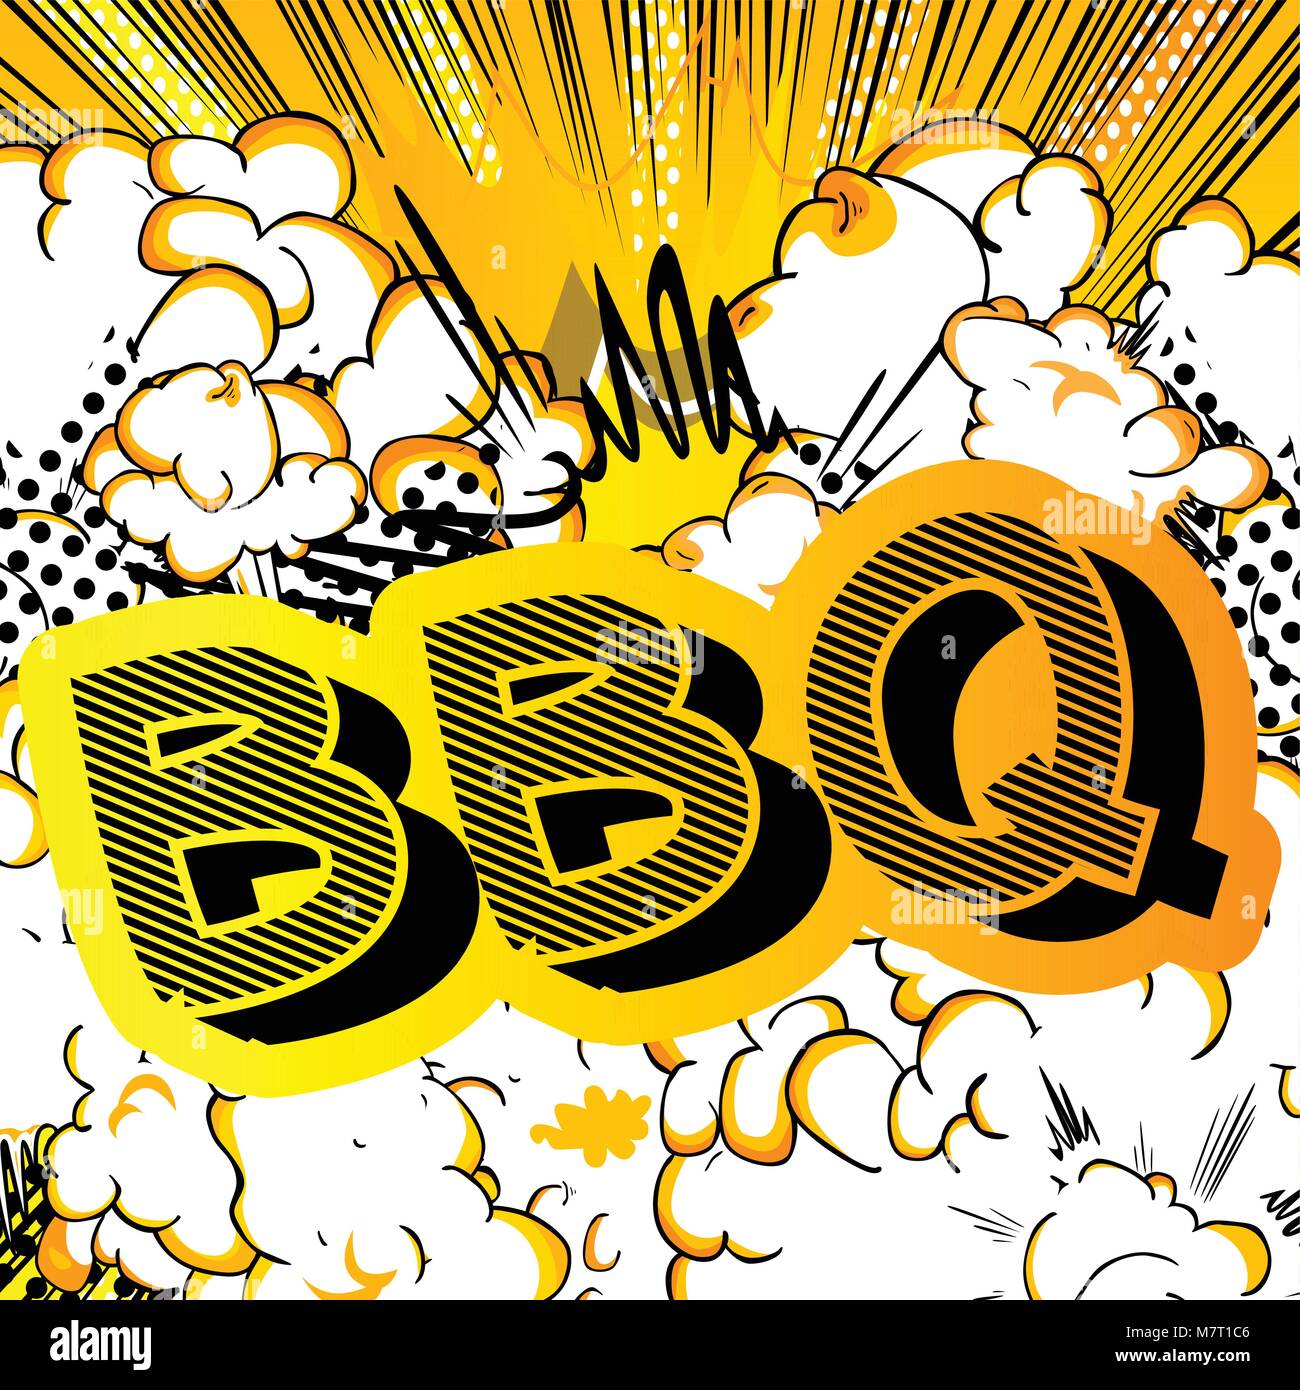 BBQ - Comic book style phrase on abstract background Stock Vector Art